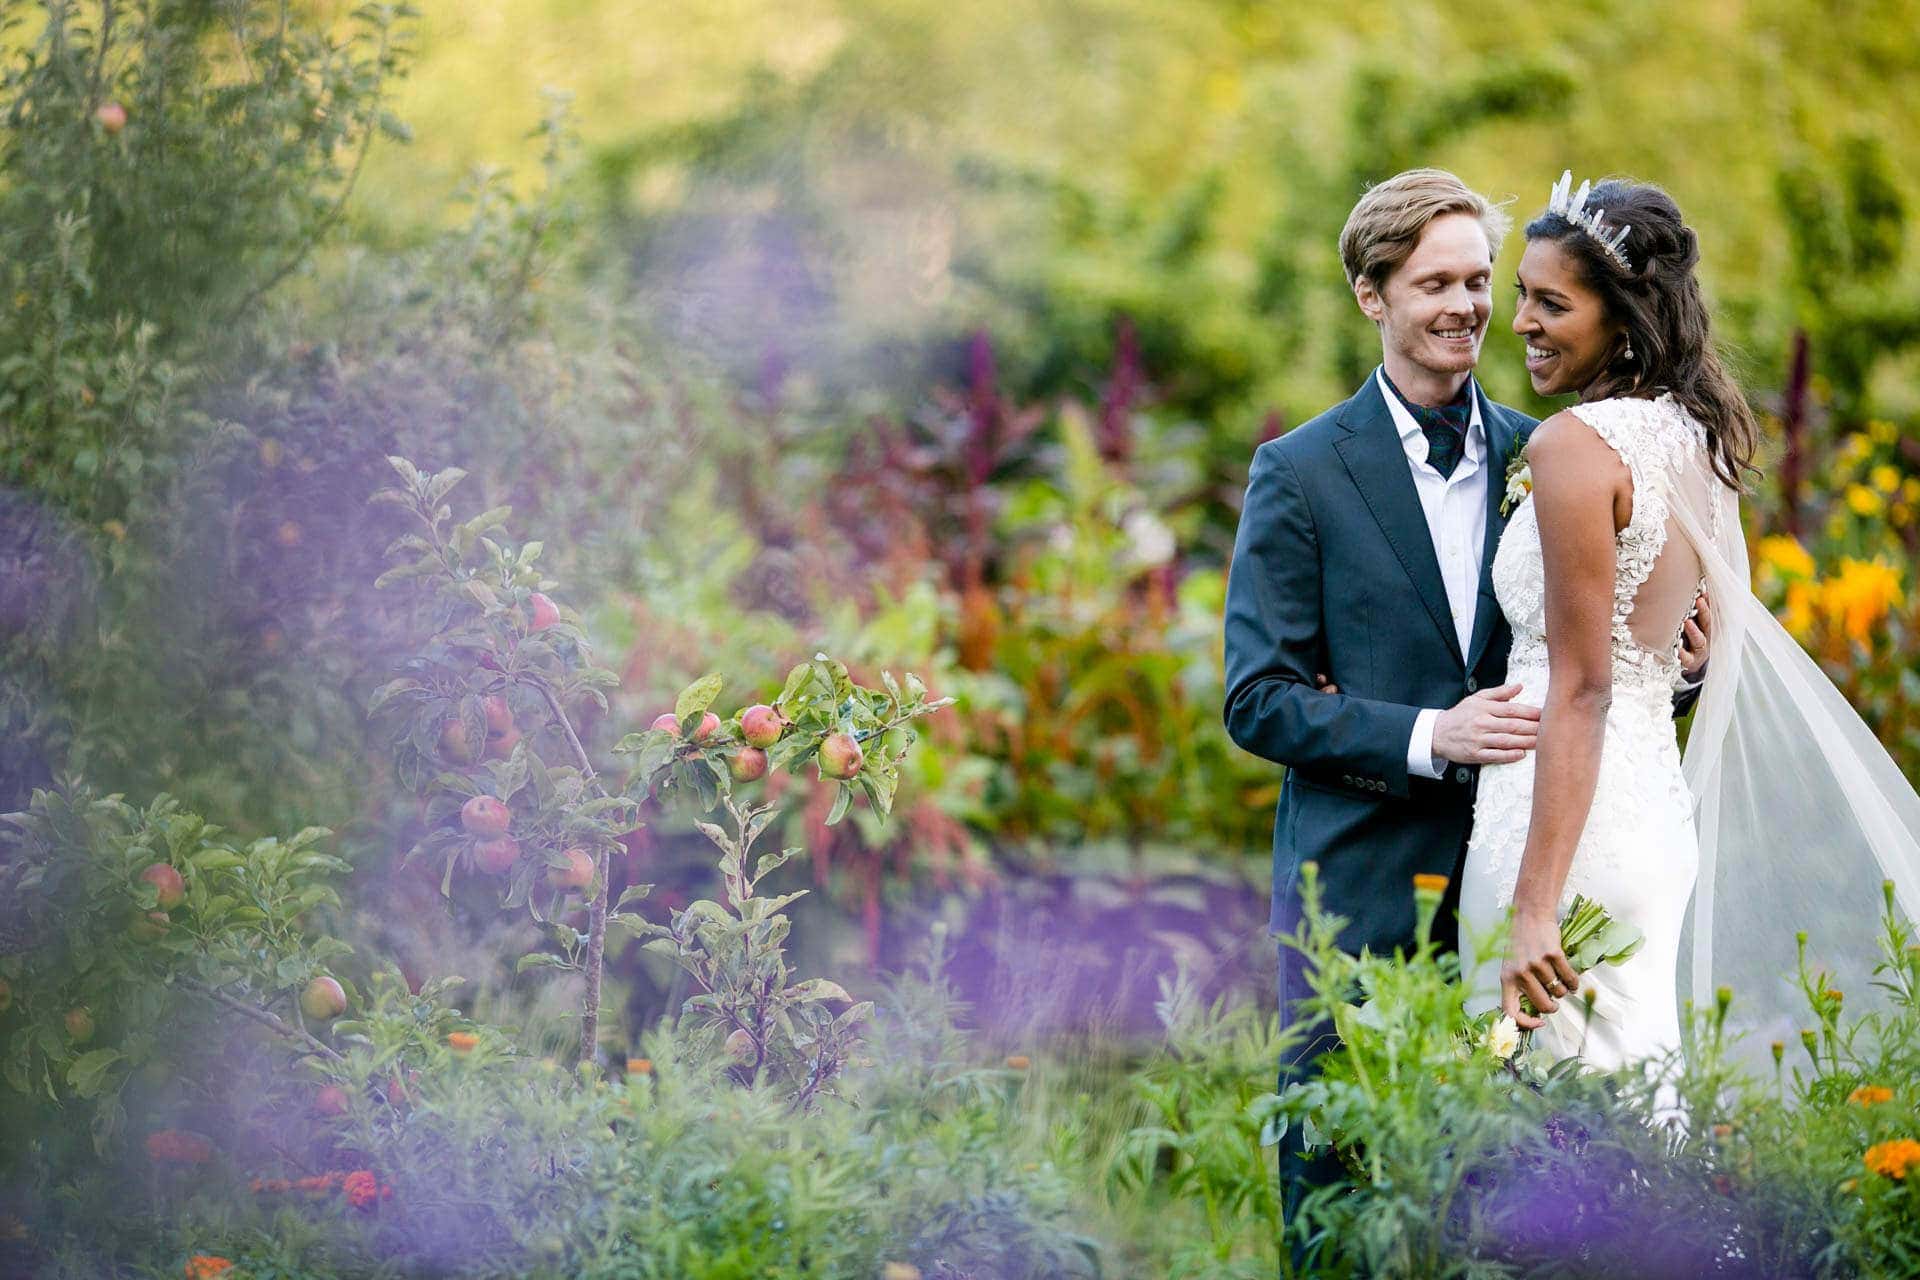 Bride with a crystal crown and groom standing in a floral garden at Oz Farm